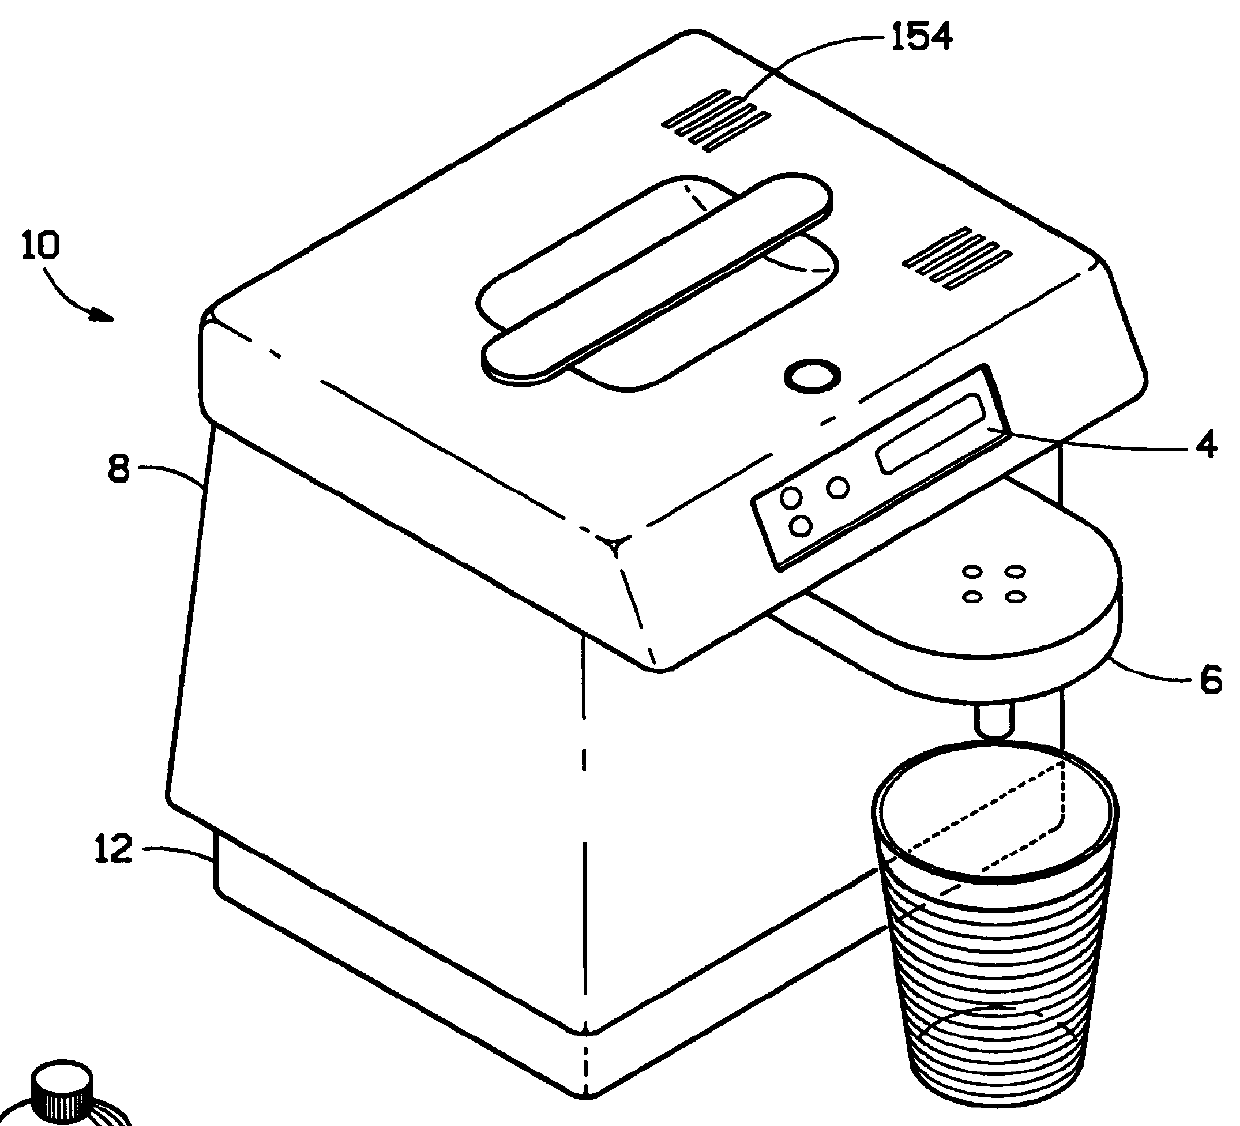 Point-of-use water purification system with a cascade ion exchange option